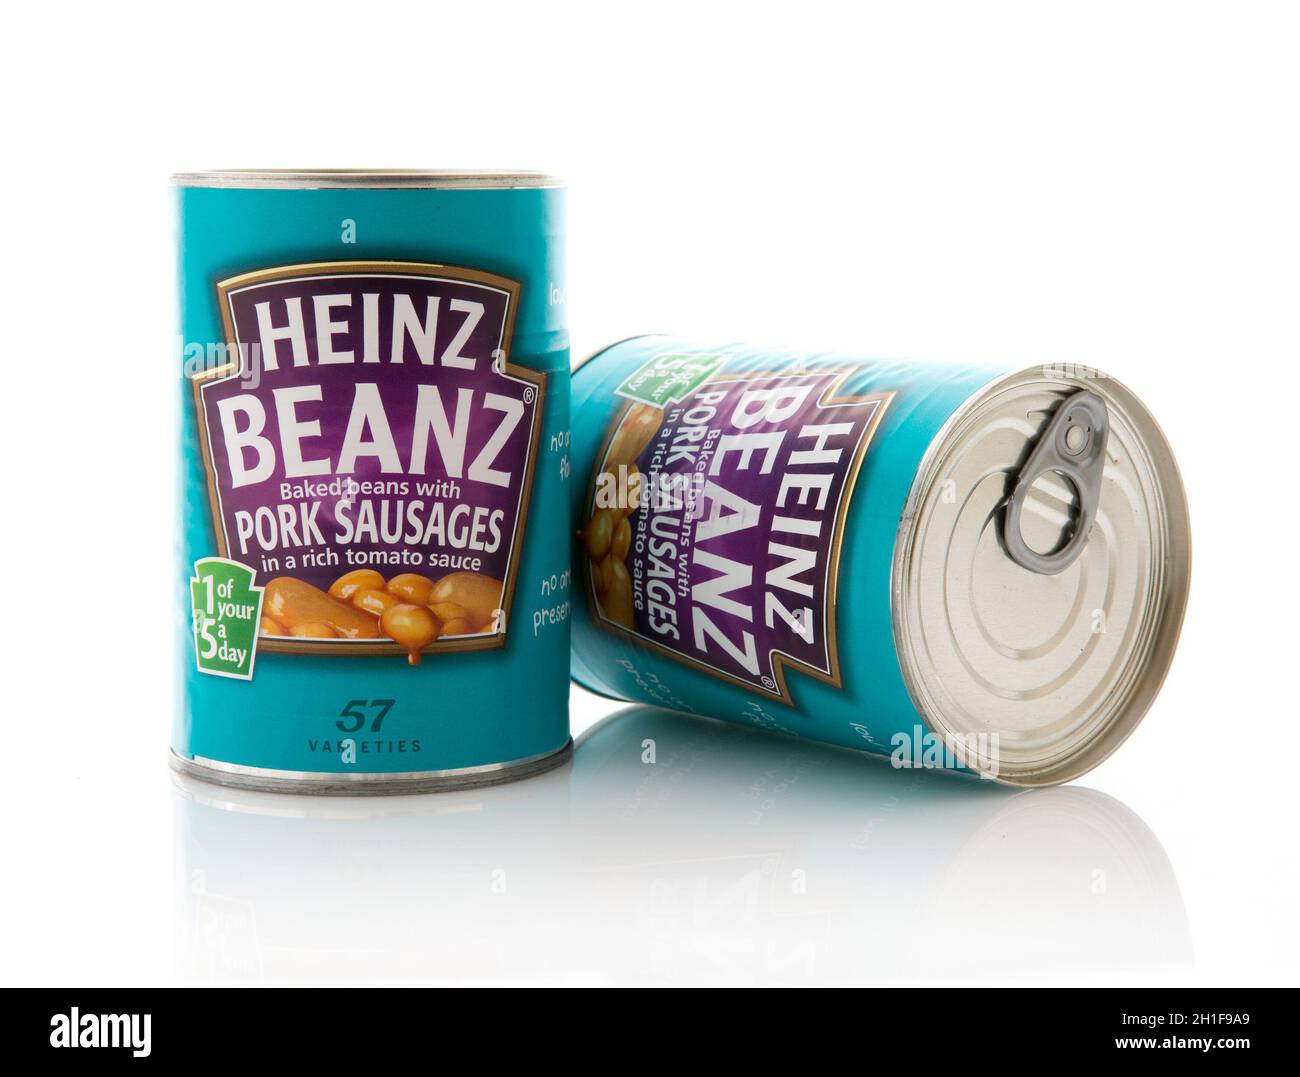 SWINDON, UK - JUNE 14, 2015: Two Tins of Heinz Beans with Pork Sausages Stock Photo